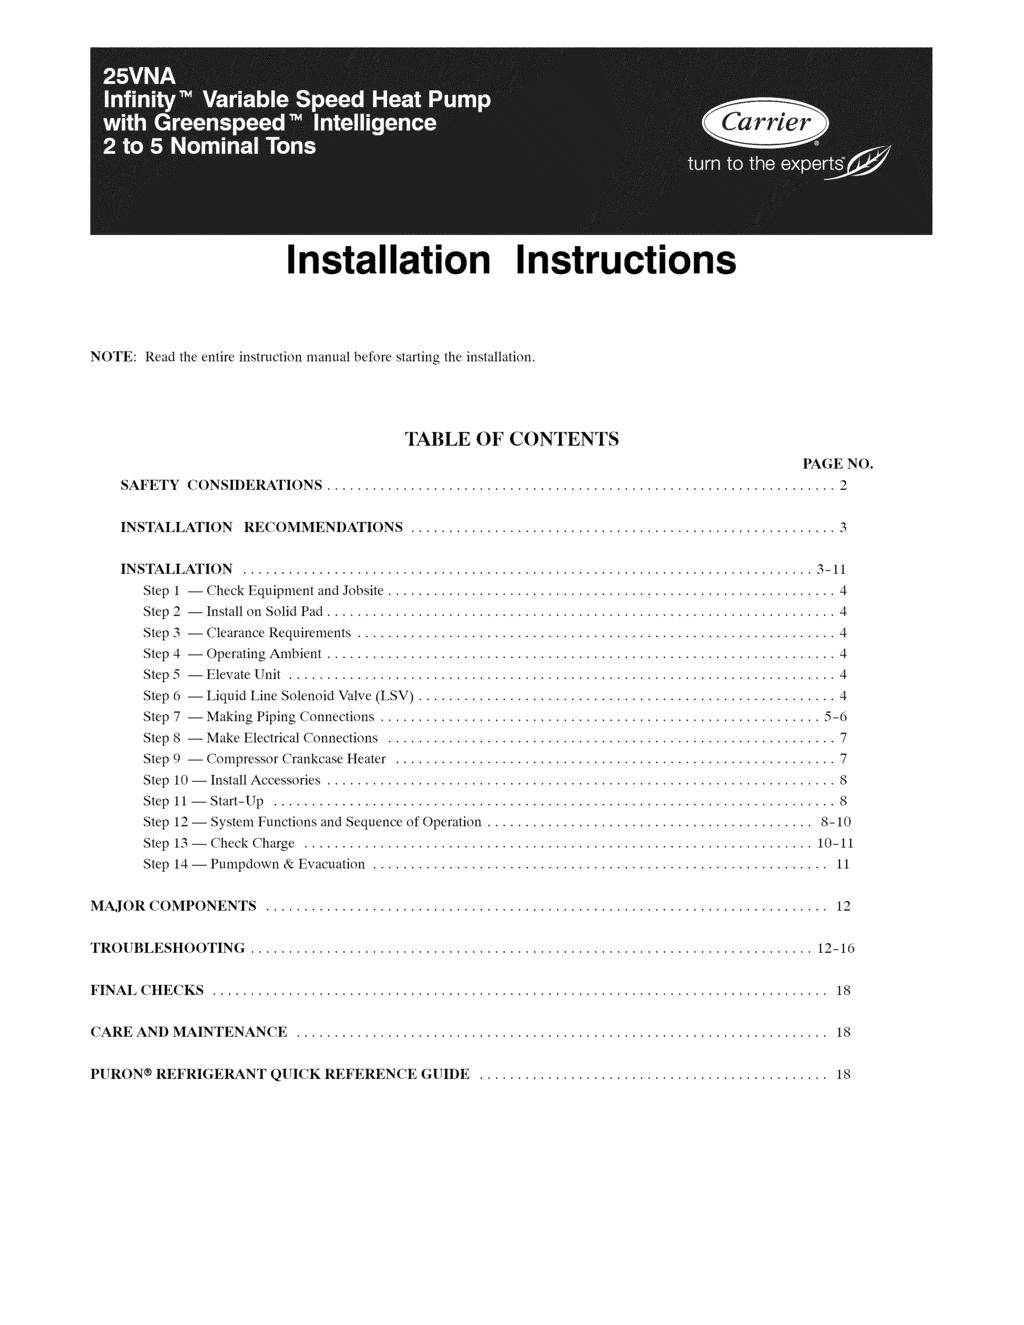 Installation Instructions NOTE: Read the entire instruction manual before starting the installation, TABLE OF CONTENTS PAGE NO. SAFETY CONSIDERATIONS... 2 INSTALLATION RECOMMENDATIONS... 3 INSTALLATION.